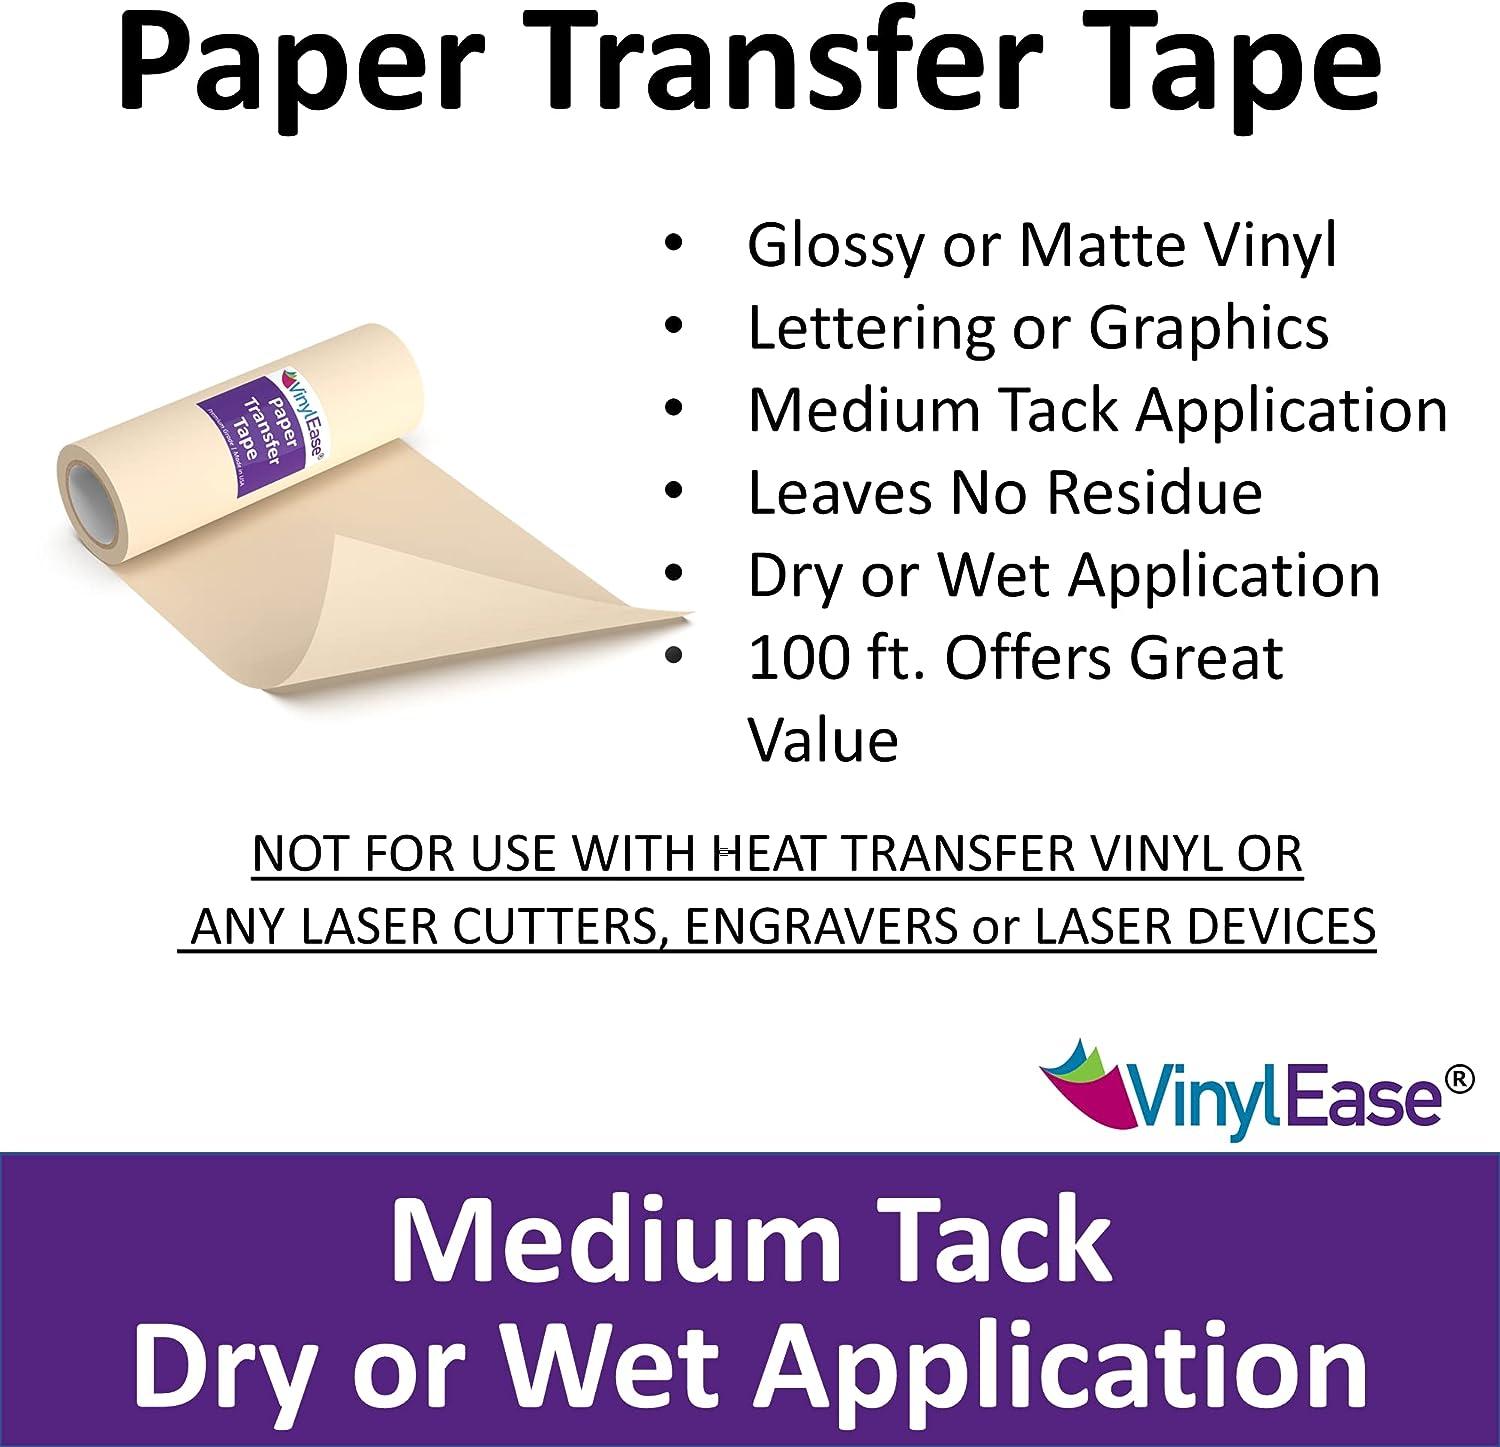 Vinyl Ease 12inch x 100 feet roll of Paper Transfer Tape with a Medium to  High Tack Layflat Adhesive. Works with a Variety of Vinyl. Great for Decals  Signs Wall Words and